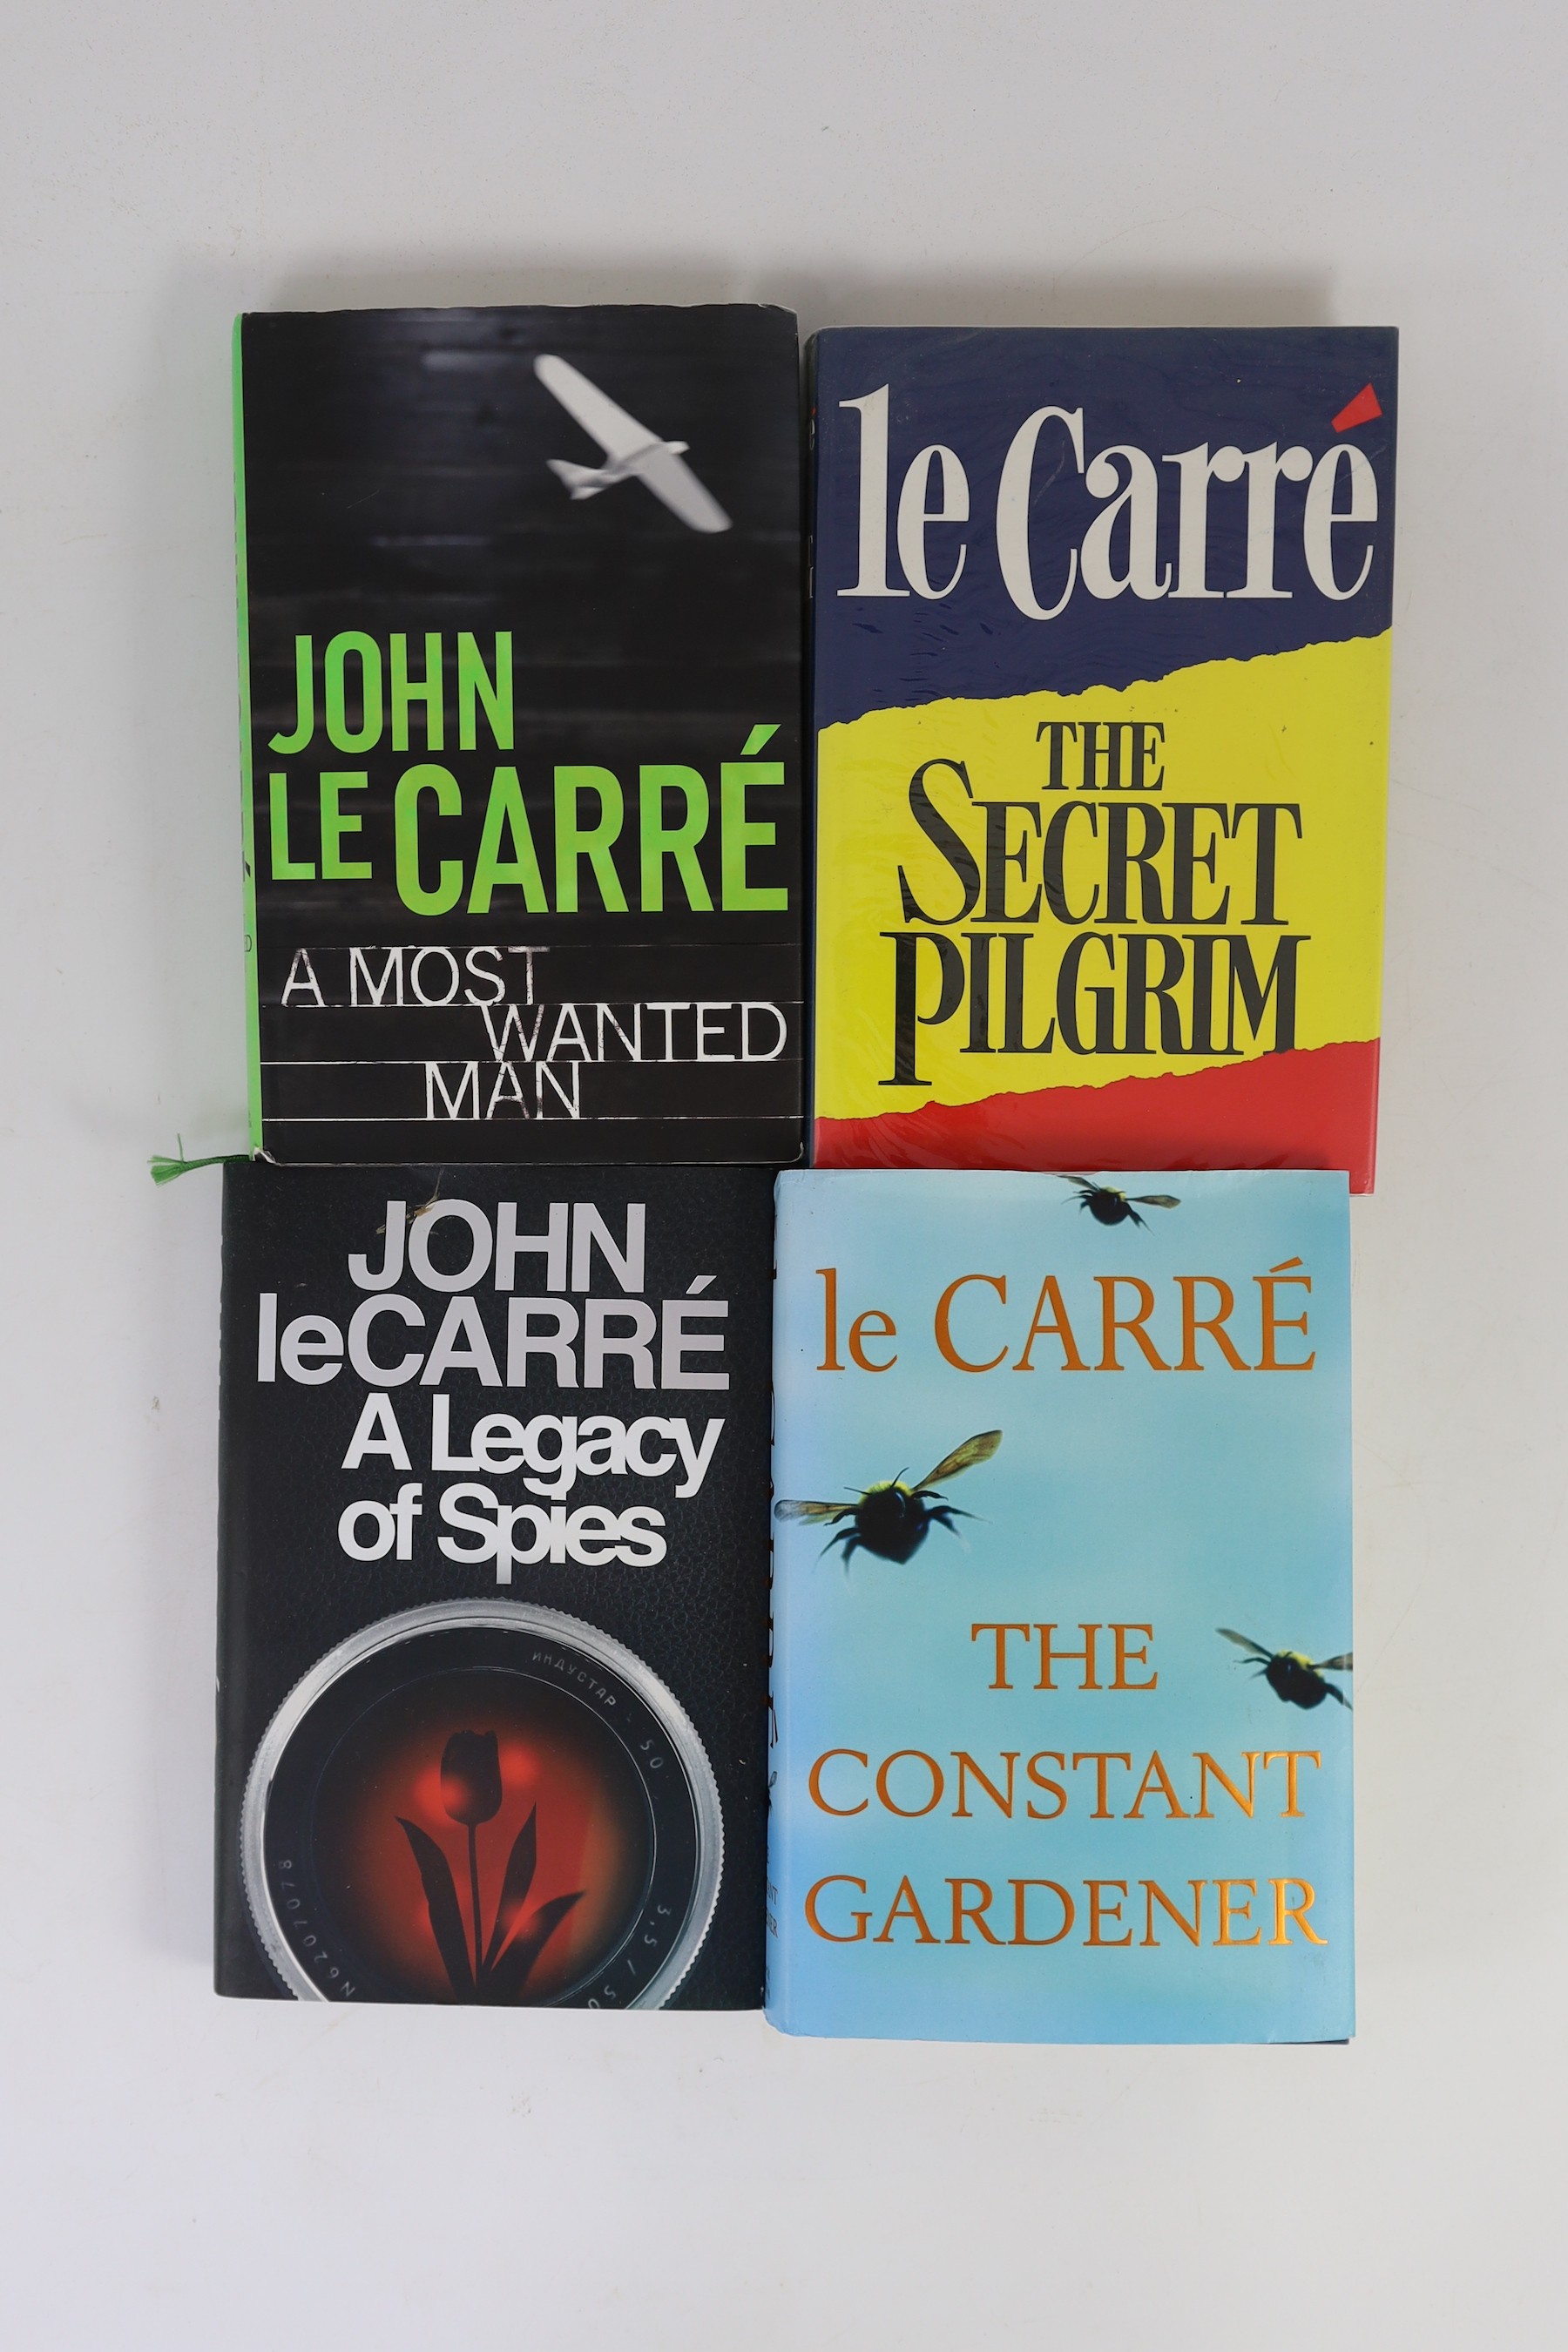 Le Carre, John - 7 Works - The Spy Who Came in from the Cold, 1st American edition, 8vo cloth, in torn d/j, Coward McCann, New York, 1964; The Honourable Schoolboy, 8vo, cloth in torn d/j, Hodder and Stoughton, London, t